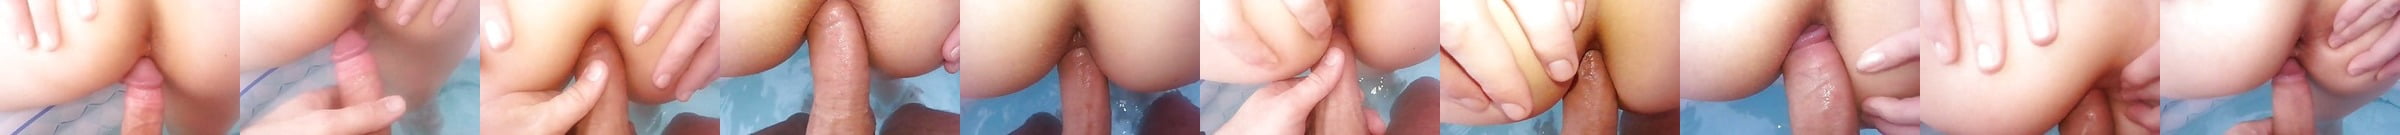 Featured Swapping Holes Porn Videos Xhamster